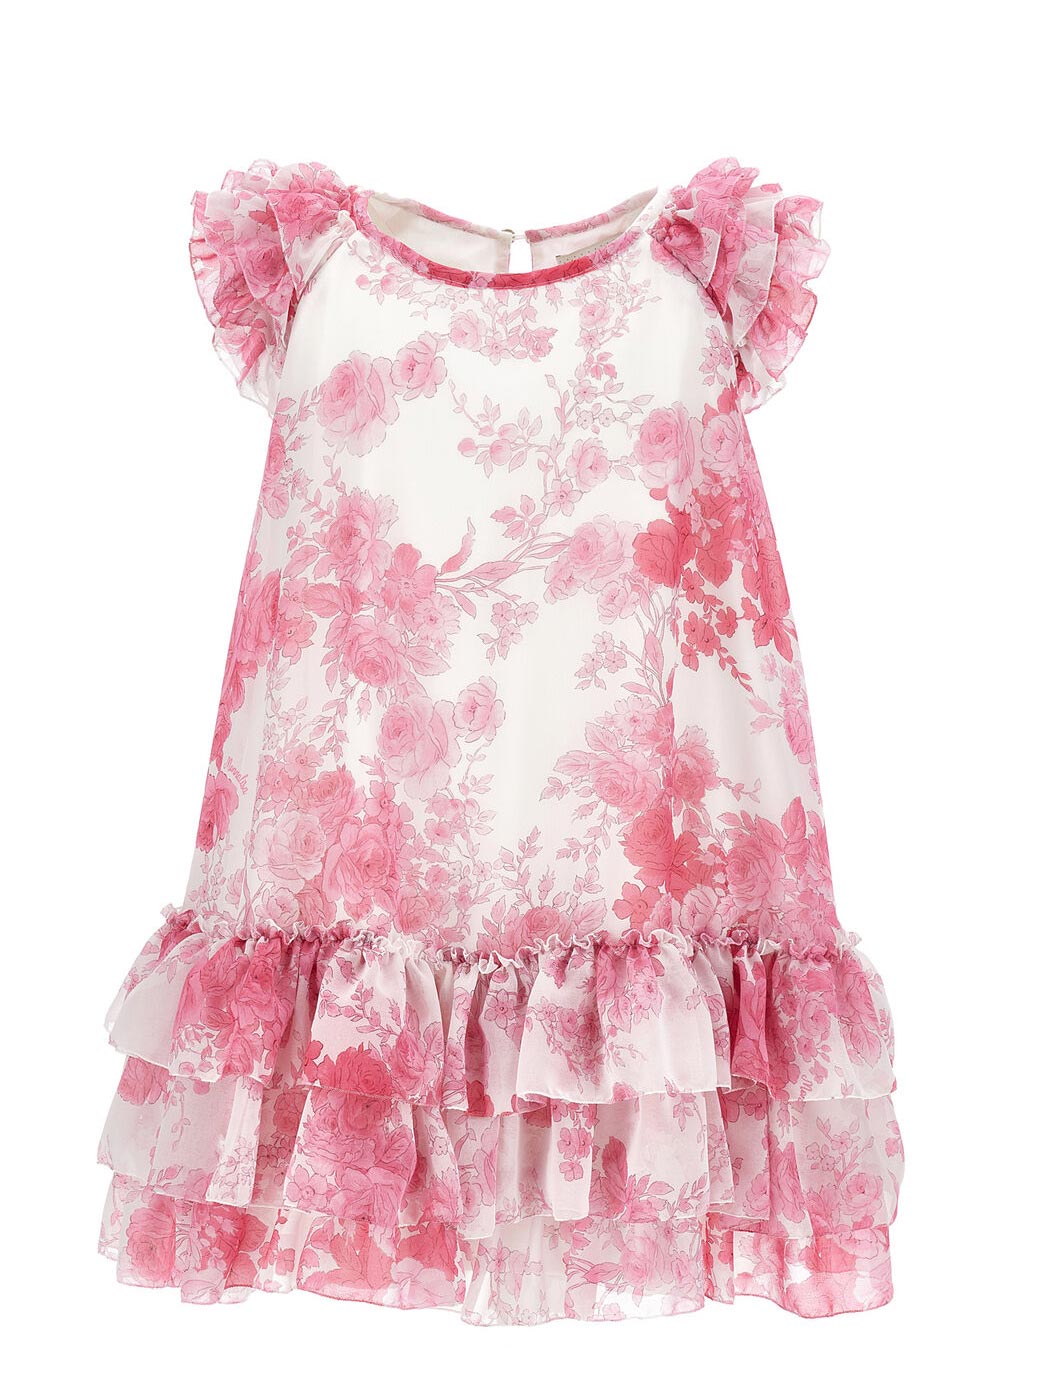 Girls tulle dress with flounces-71C916